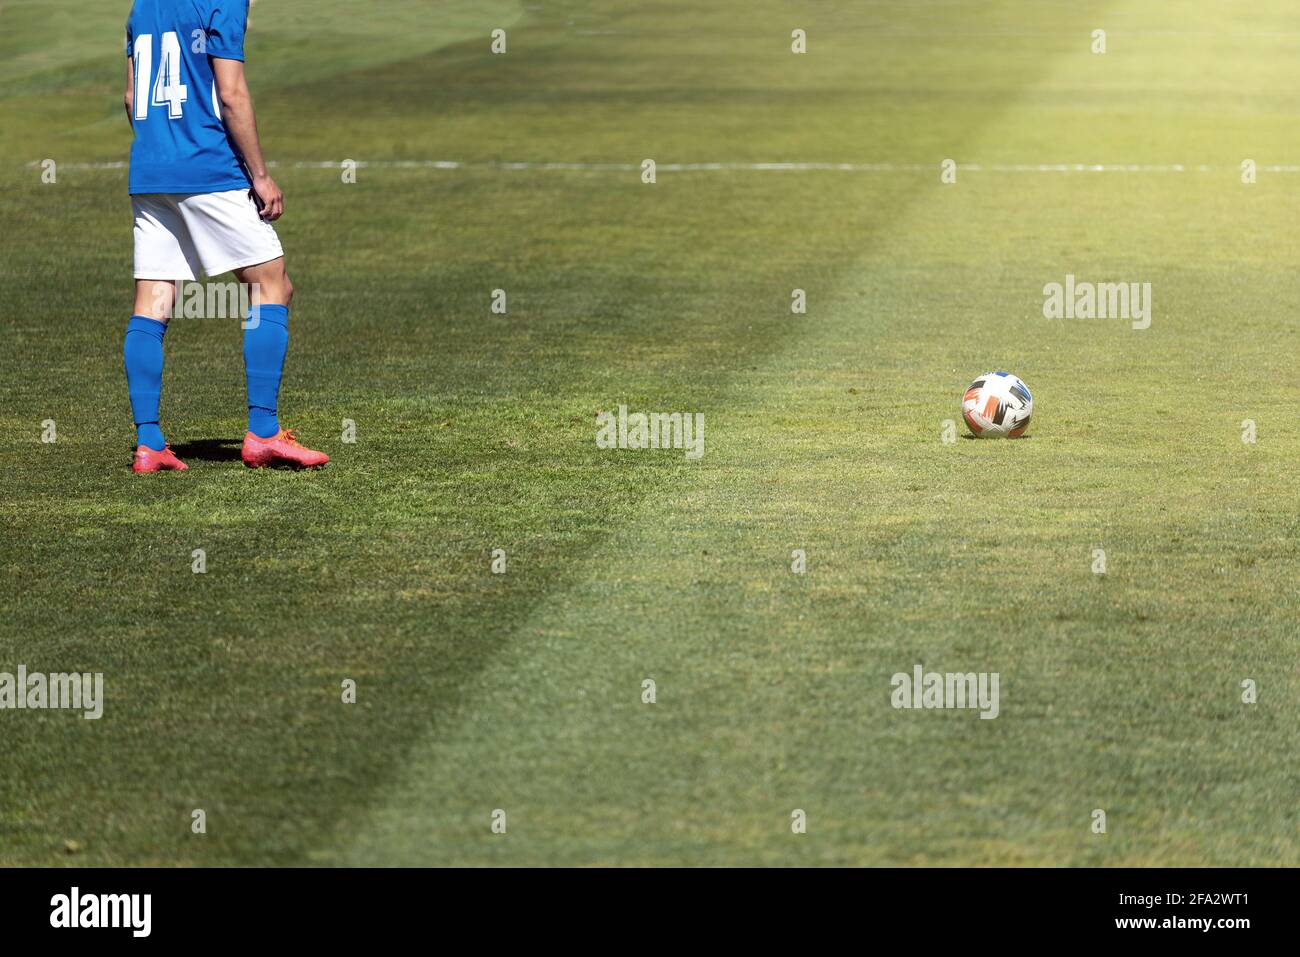 Soccer player ready to take a free kick a few meters away from the ball on a natural grass pitch. Stock Photo